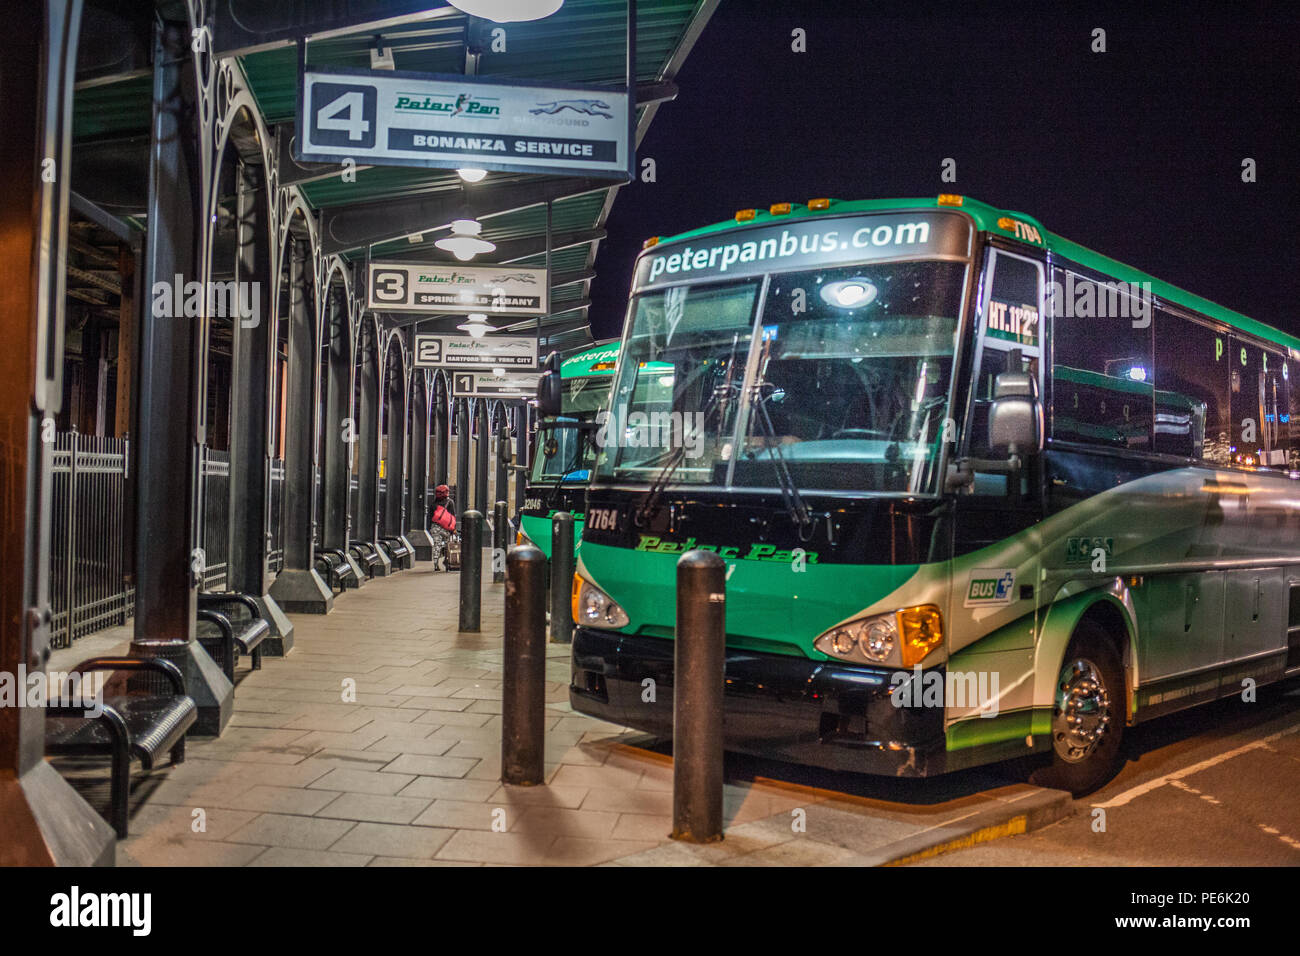 Peter Pan bus waiting for passengers at Union Station in Worcester, MA Stock Photo